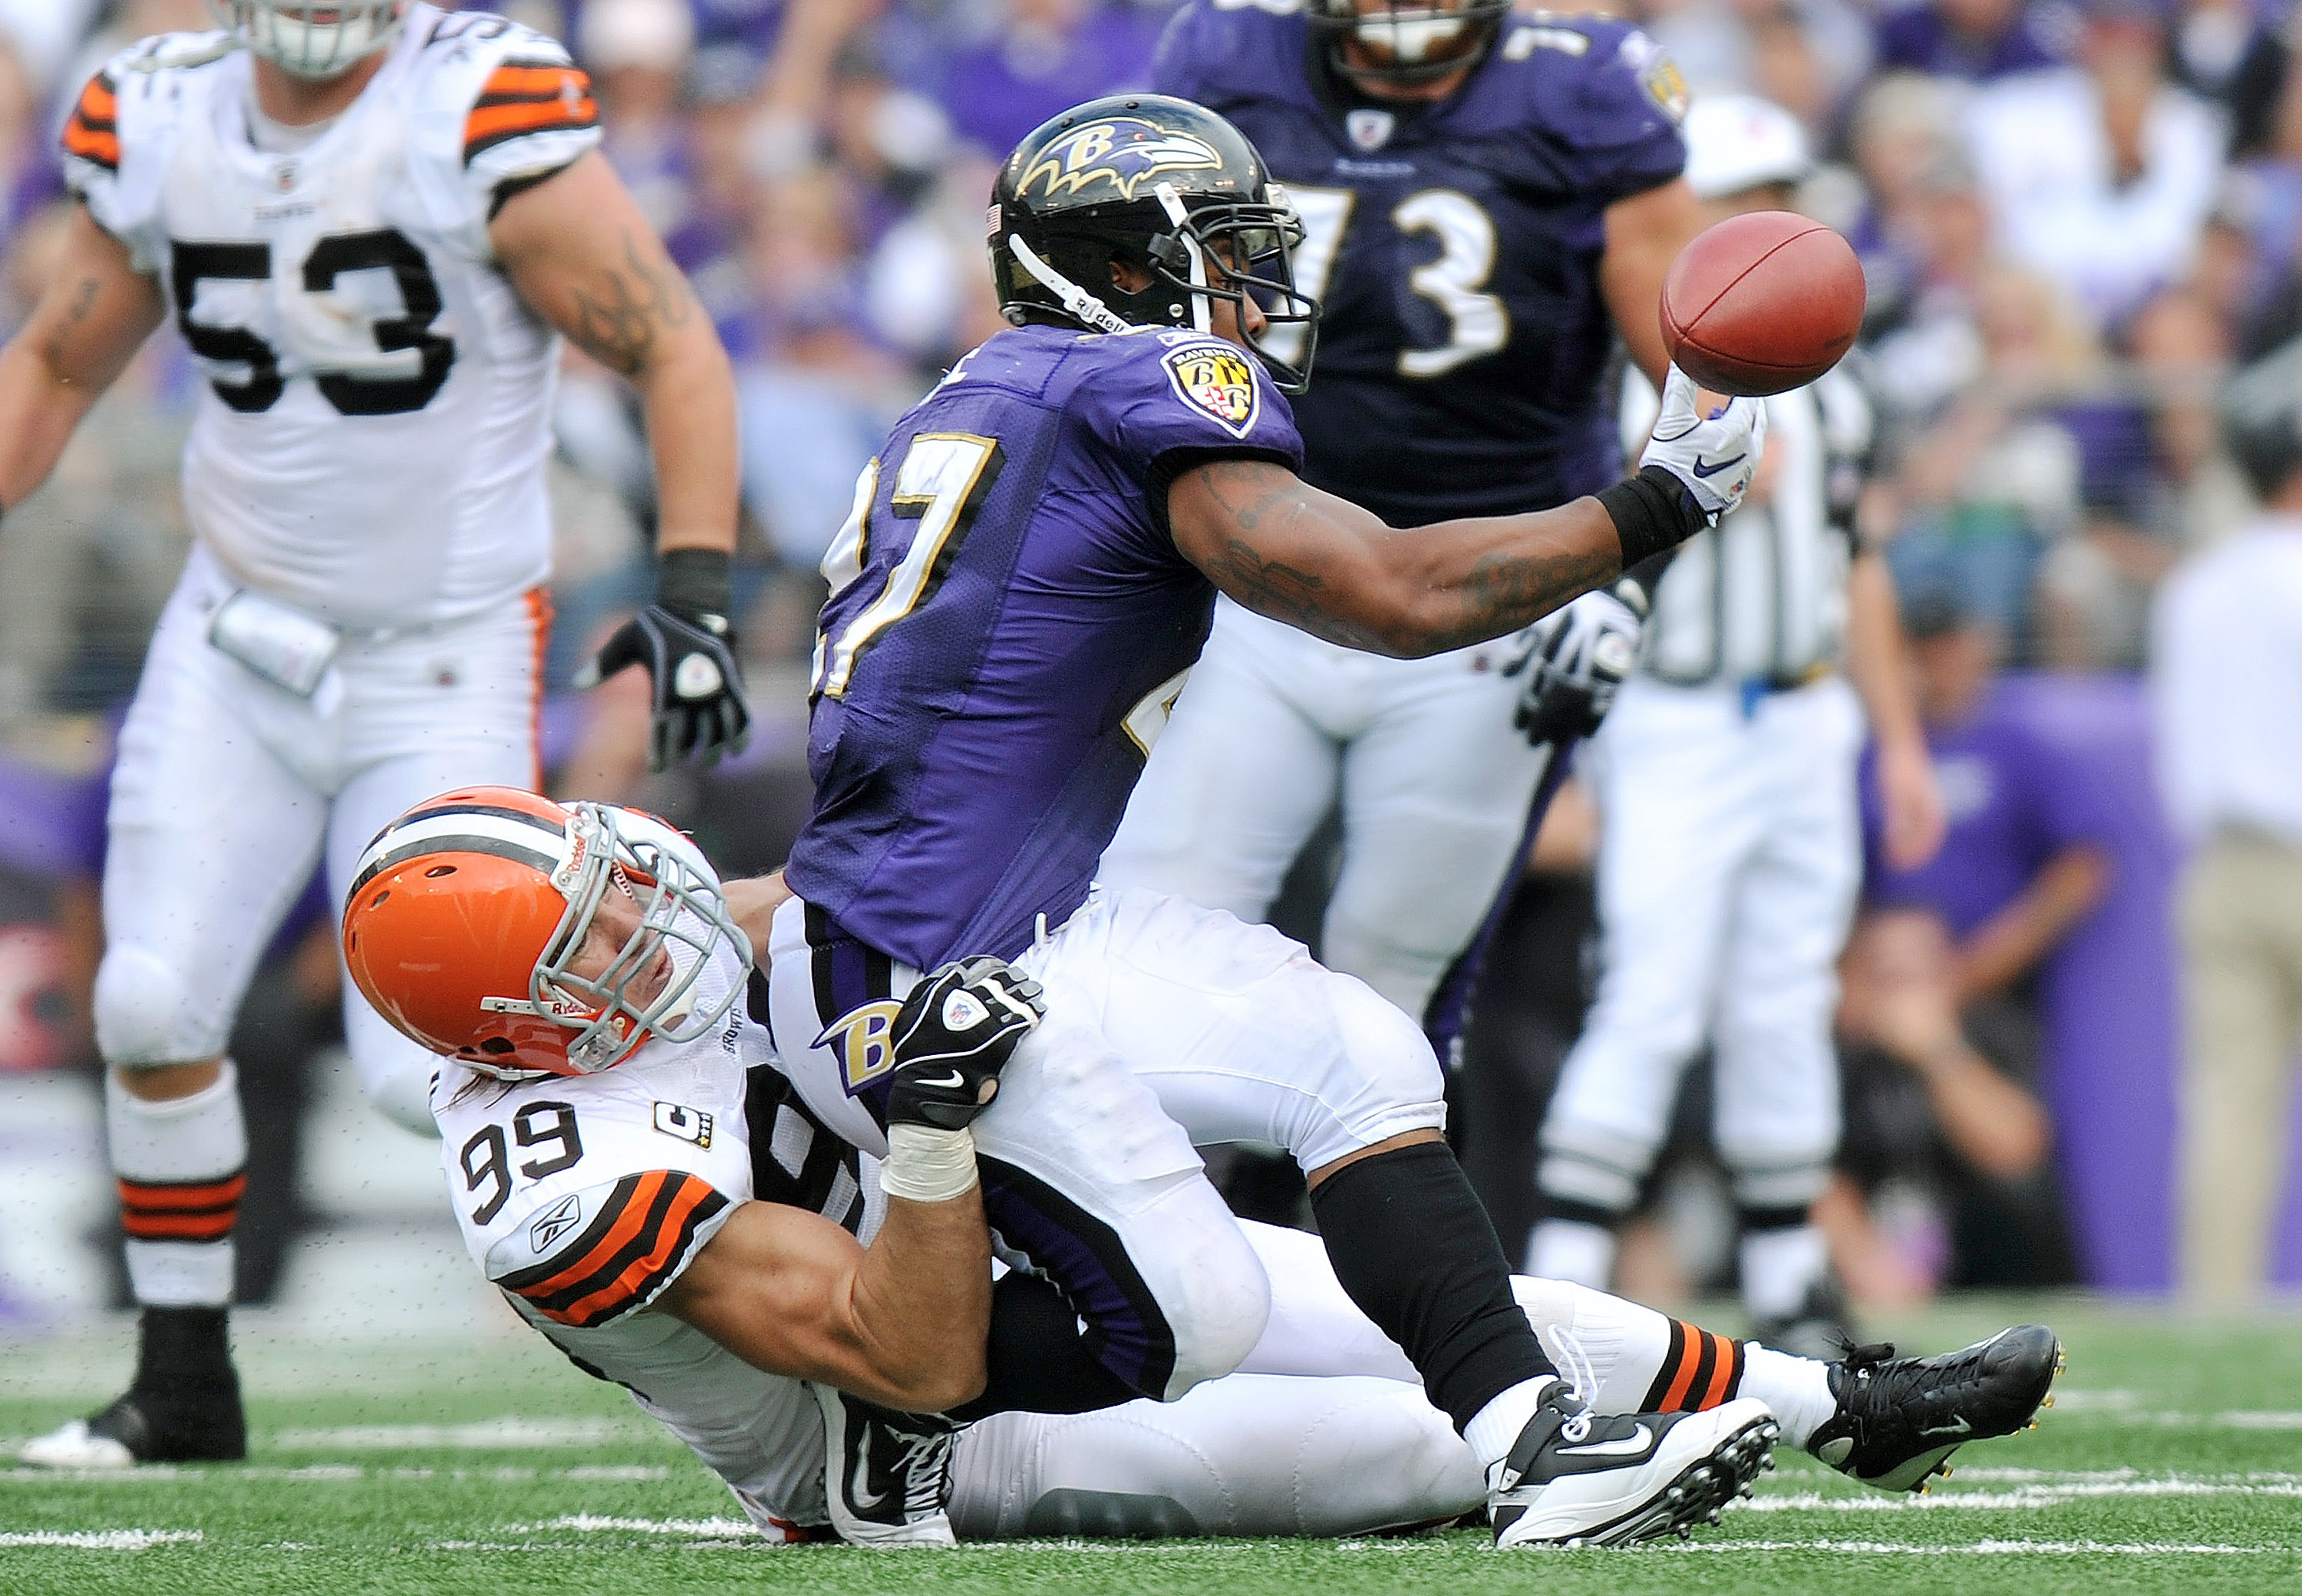 BALTIMORE - SEPTEMBER 26:  Ray Rice #27 of the Baltimore Ravens can't hold onto a pass as he's taken down by Scott Fujita #99 of the Cleveland Browns  at M&T Bank Stadium on September 26, 2010 in Baltimore, Maryland. The Ravens defeated the Browns 24-17.